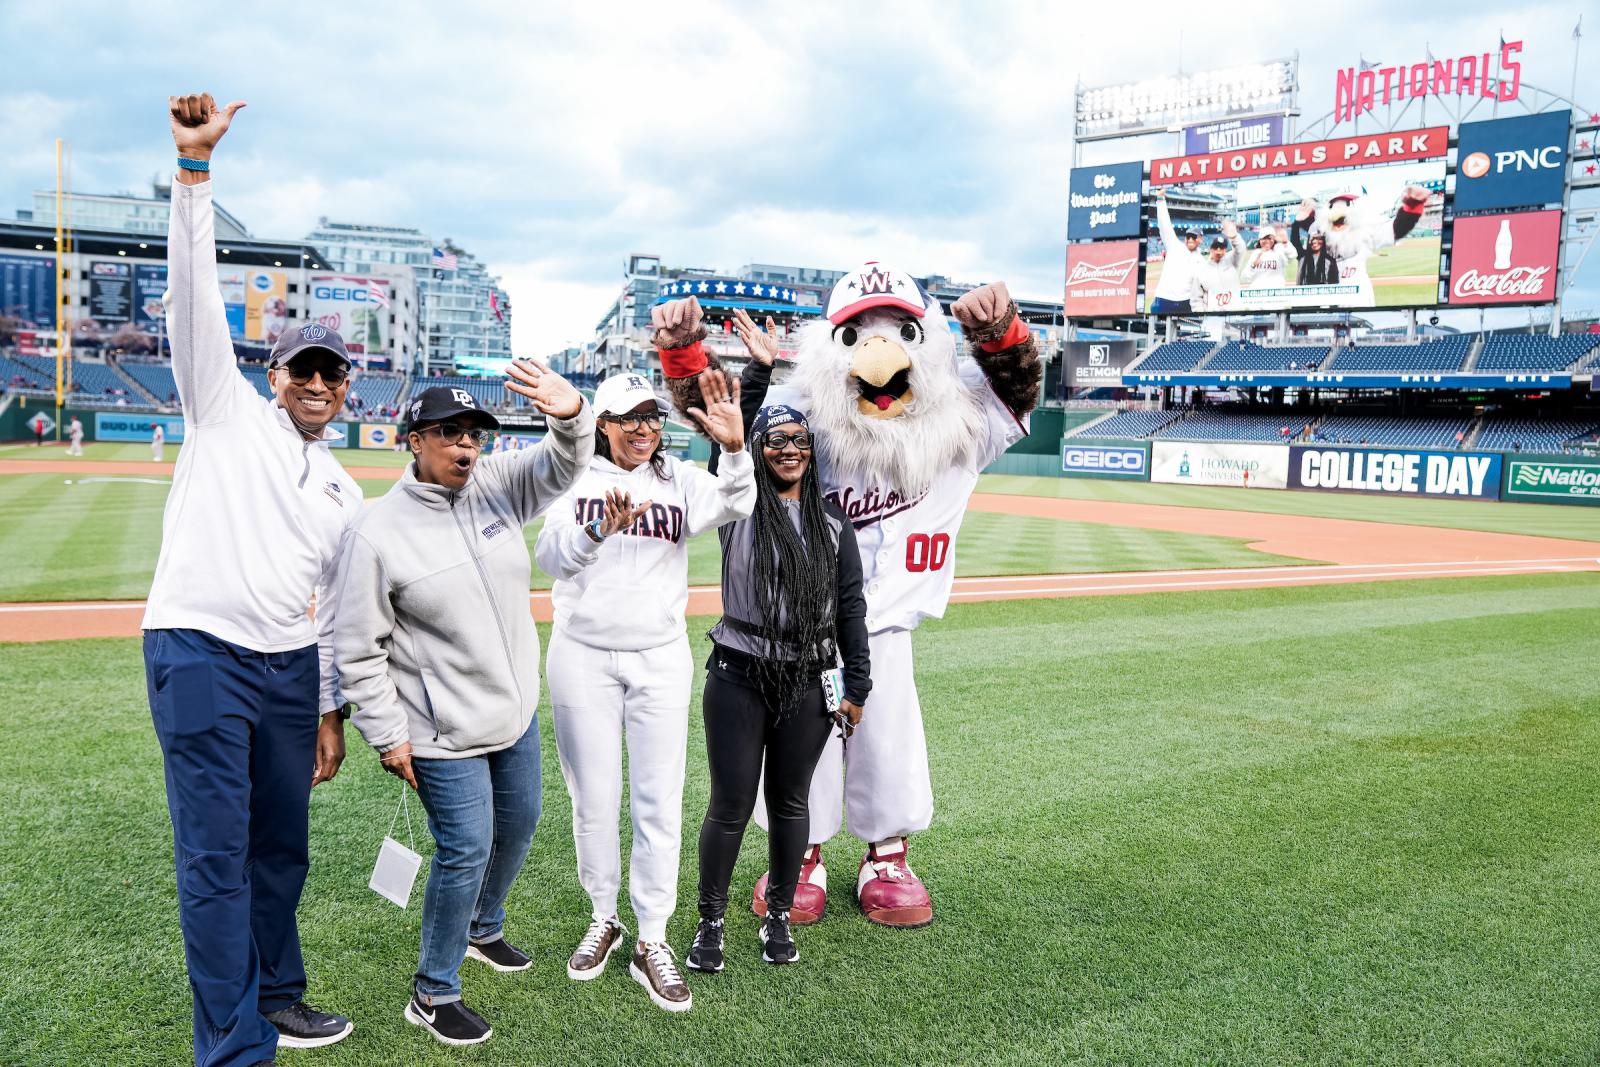 College of Nursing with Nationals mascots at Nationals Stadium